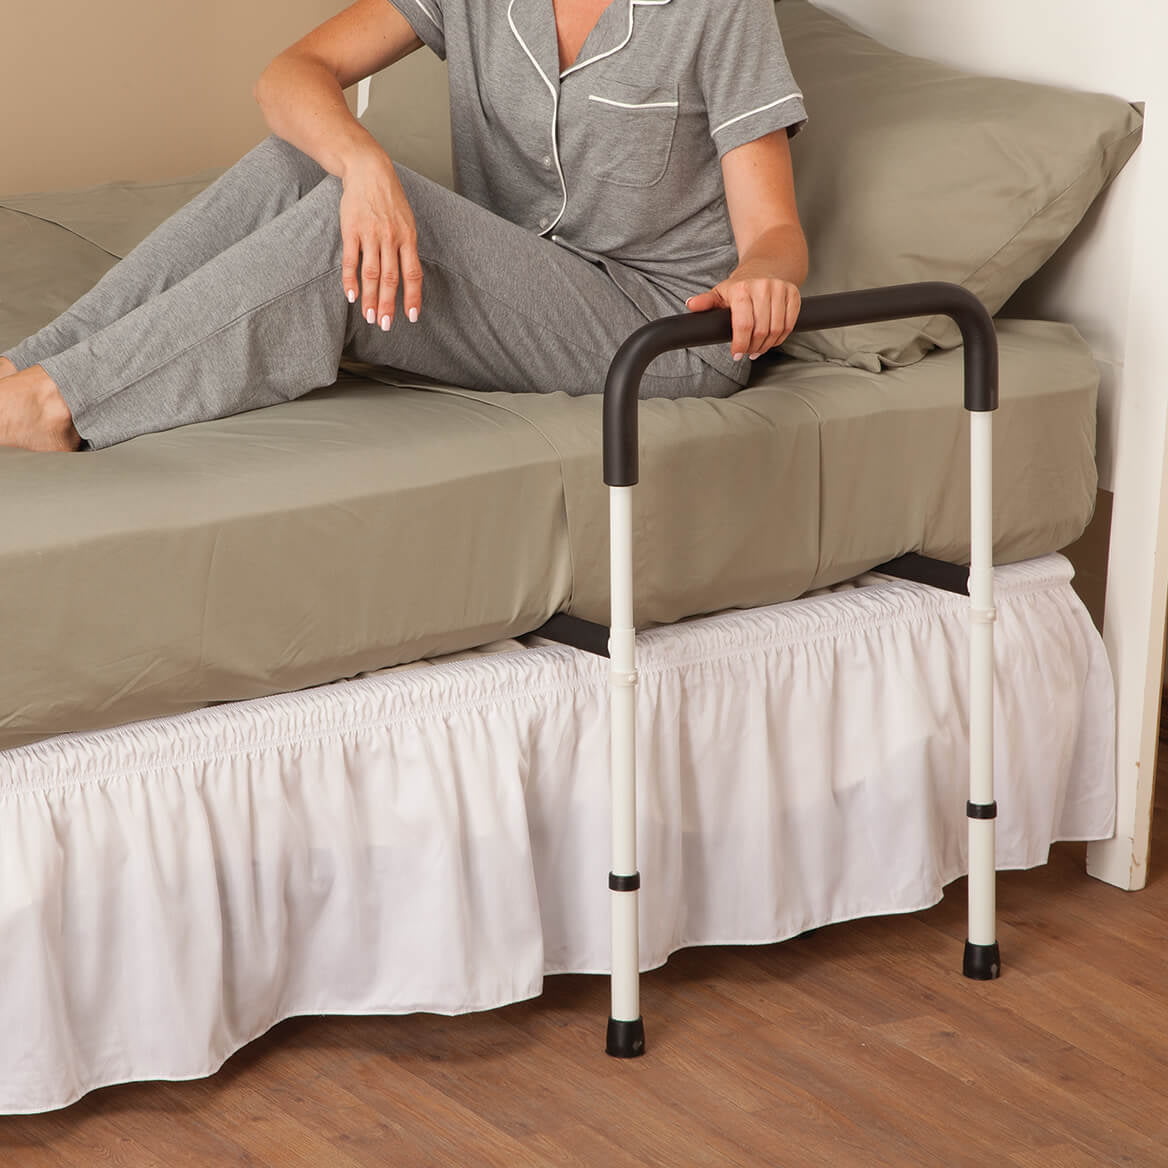 safety bed rails for queen bed